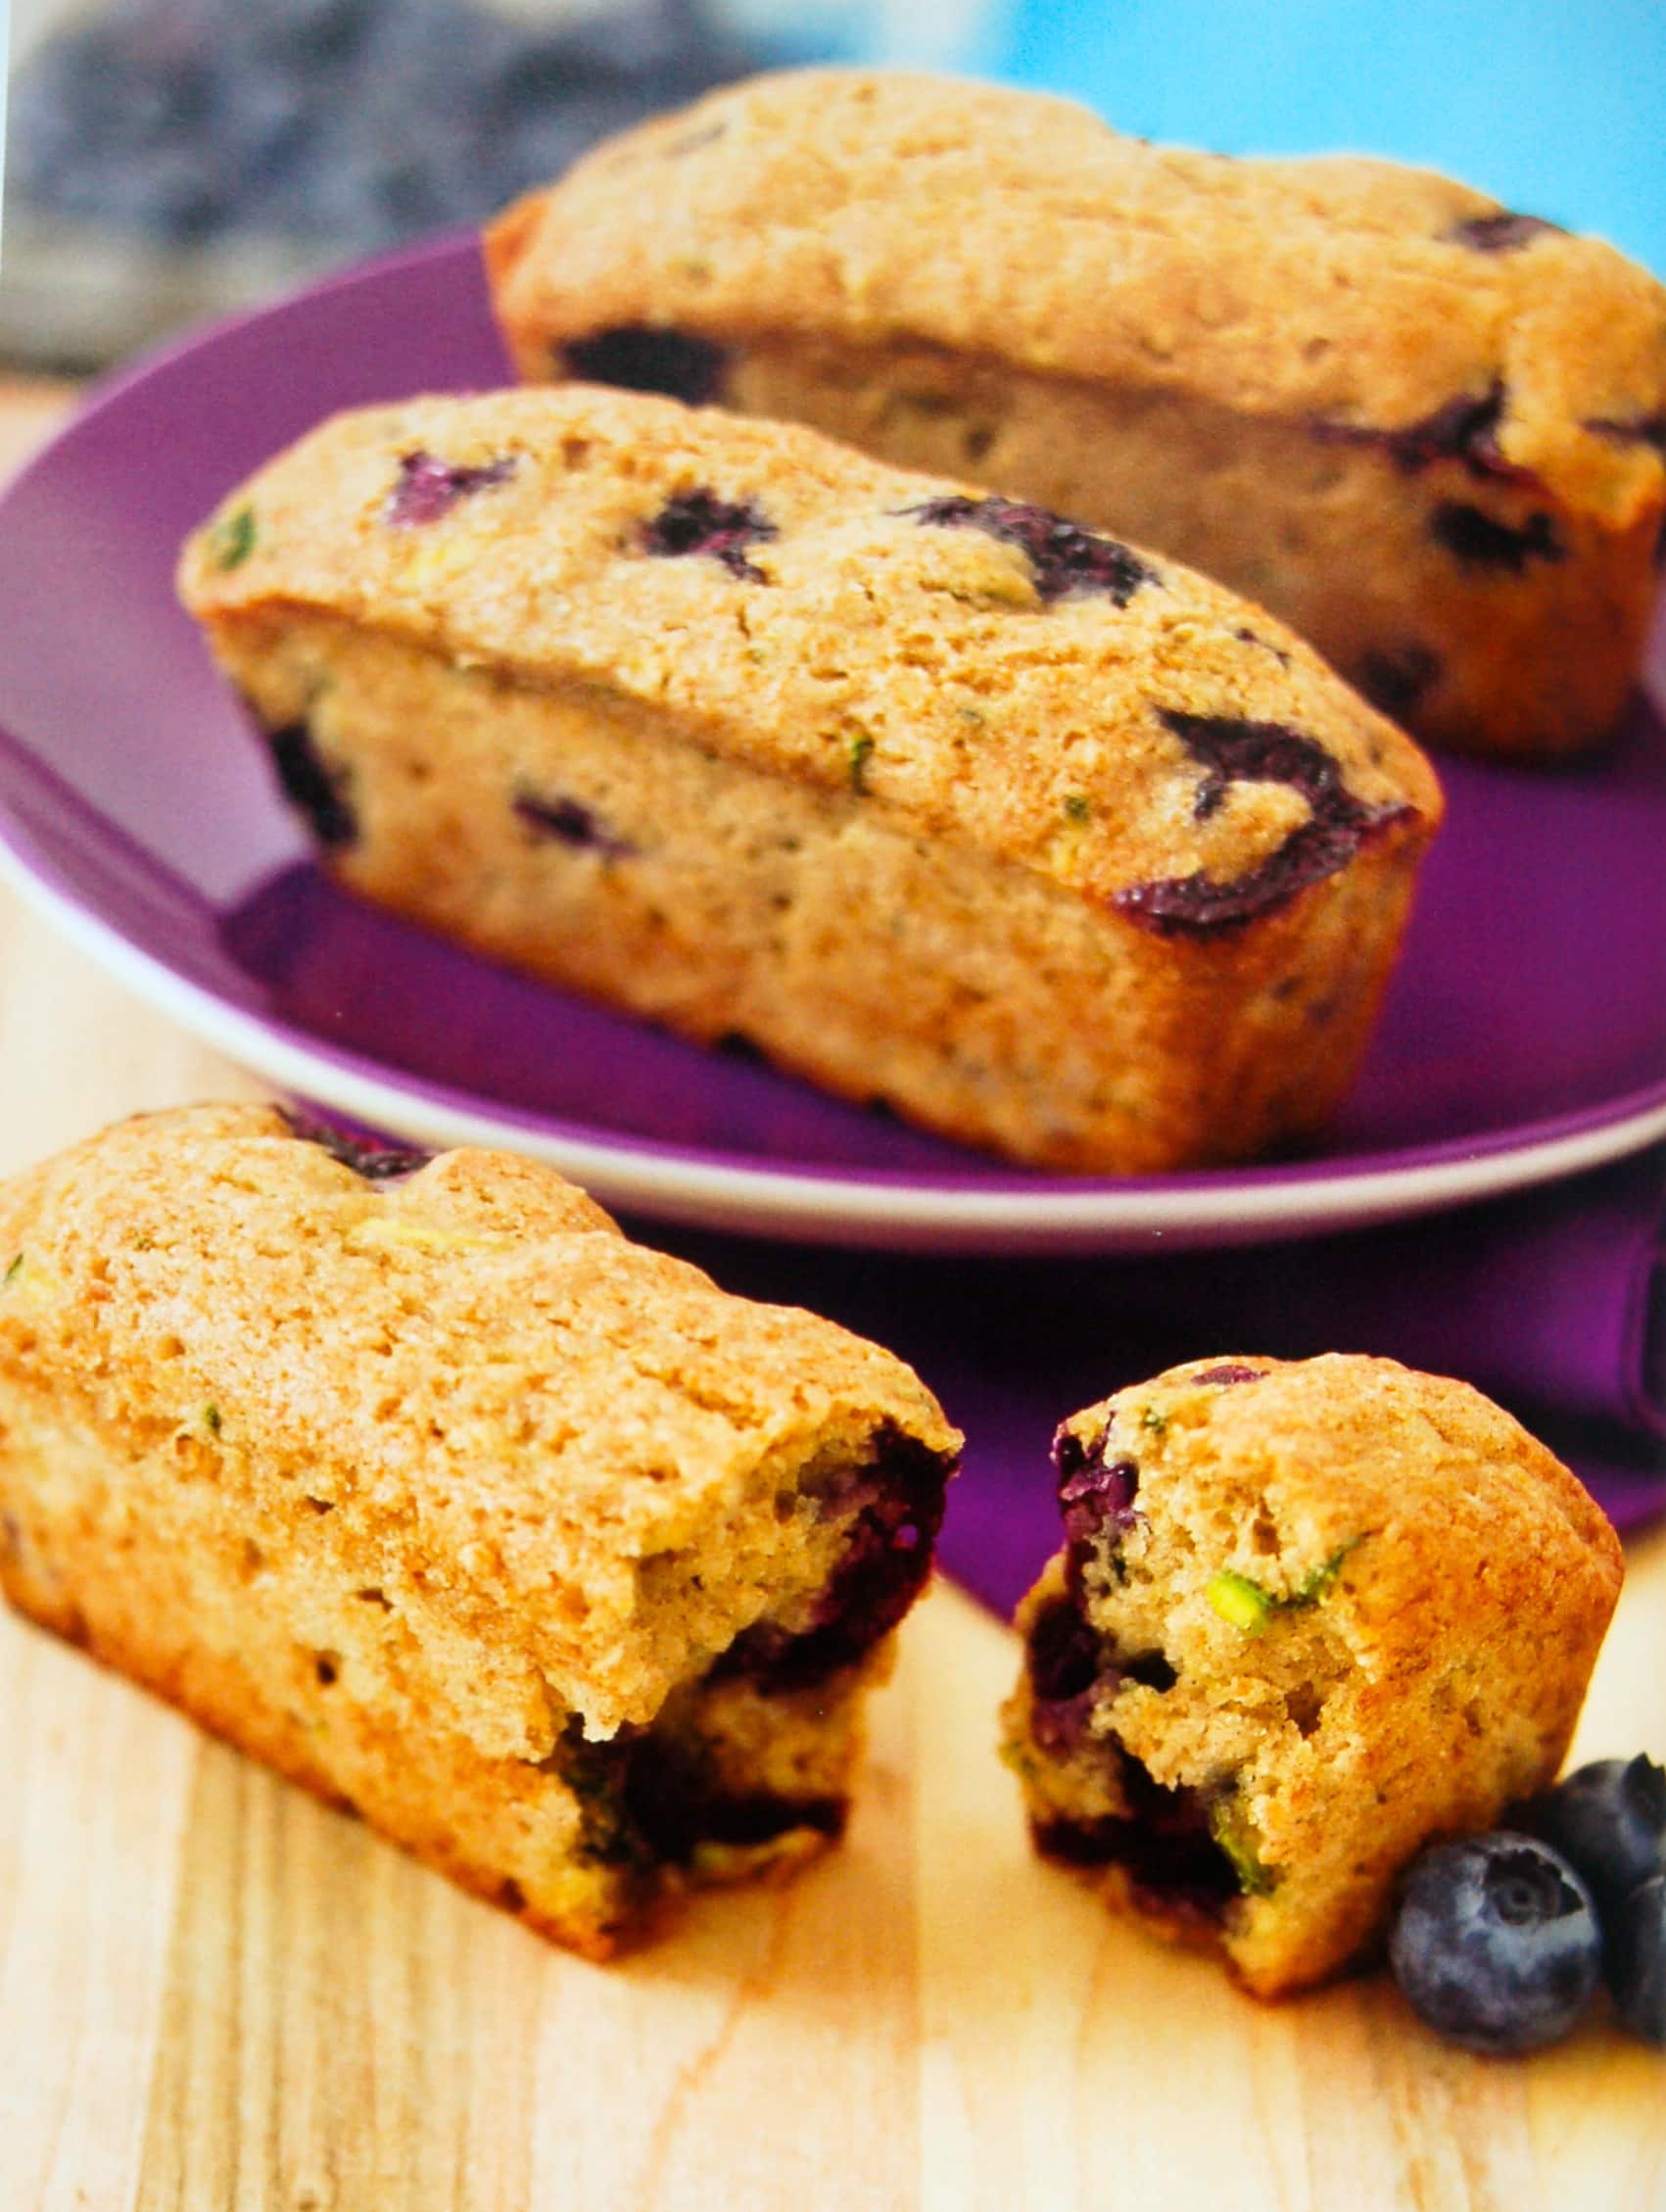 Try this delicious zucchini bread recipe packed with blueberries and flavor! Plus it's the perfect weekend brunch dish that everyone will love.